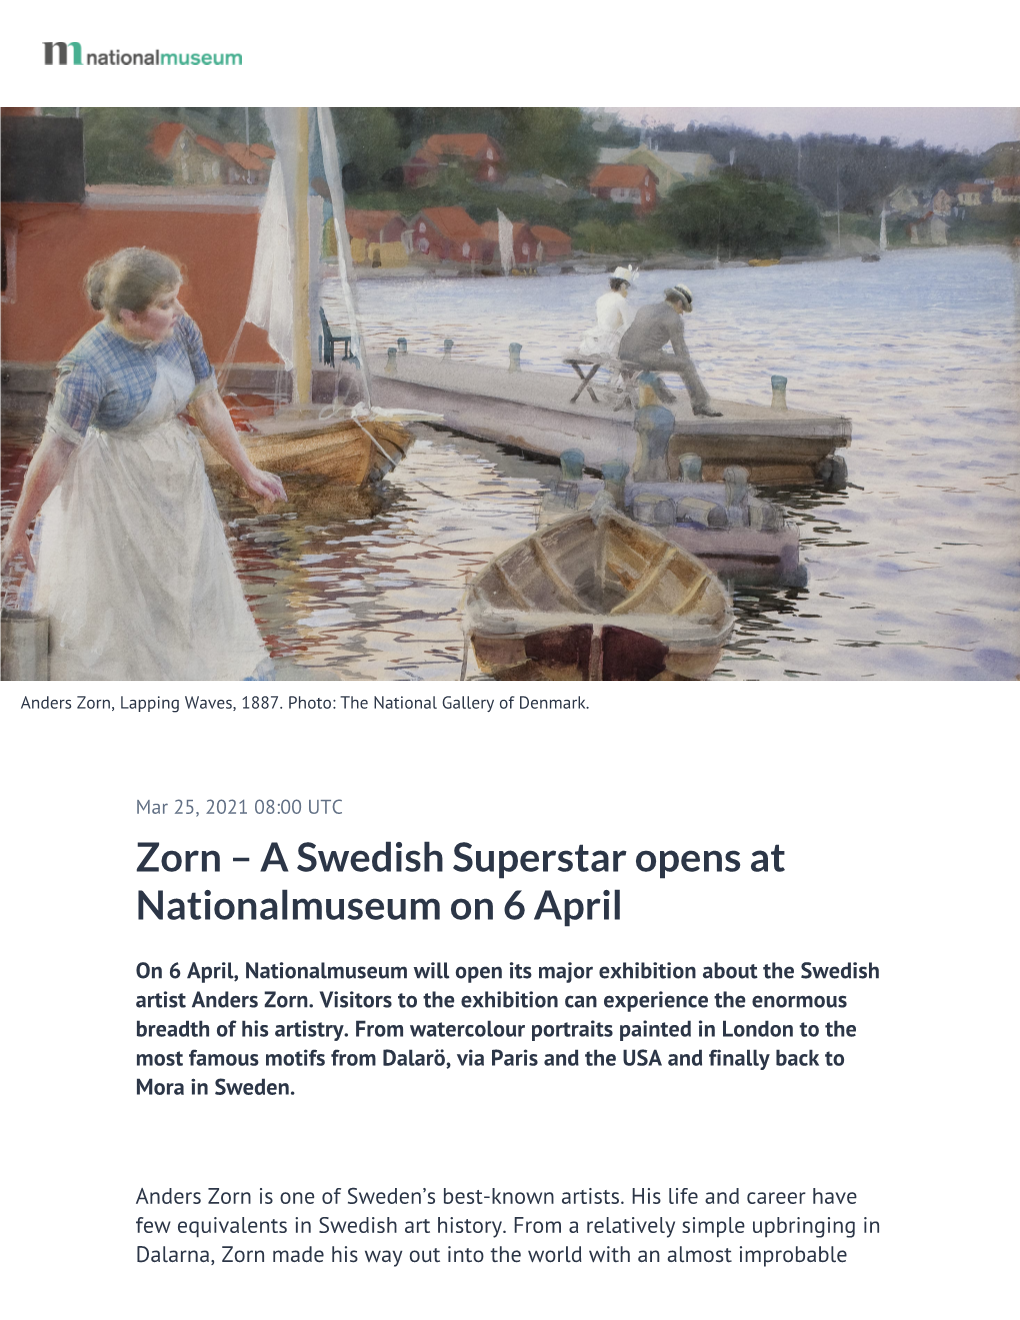 Zorn – a Swedish Superstar Opens at Nationalmuseum on 6 April